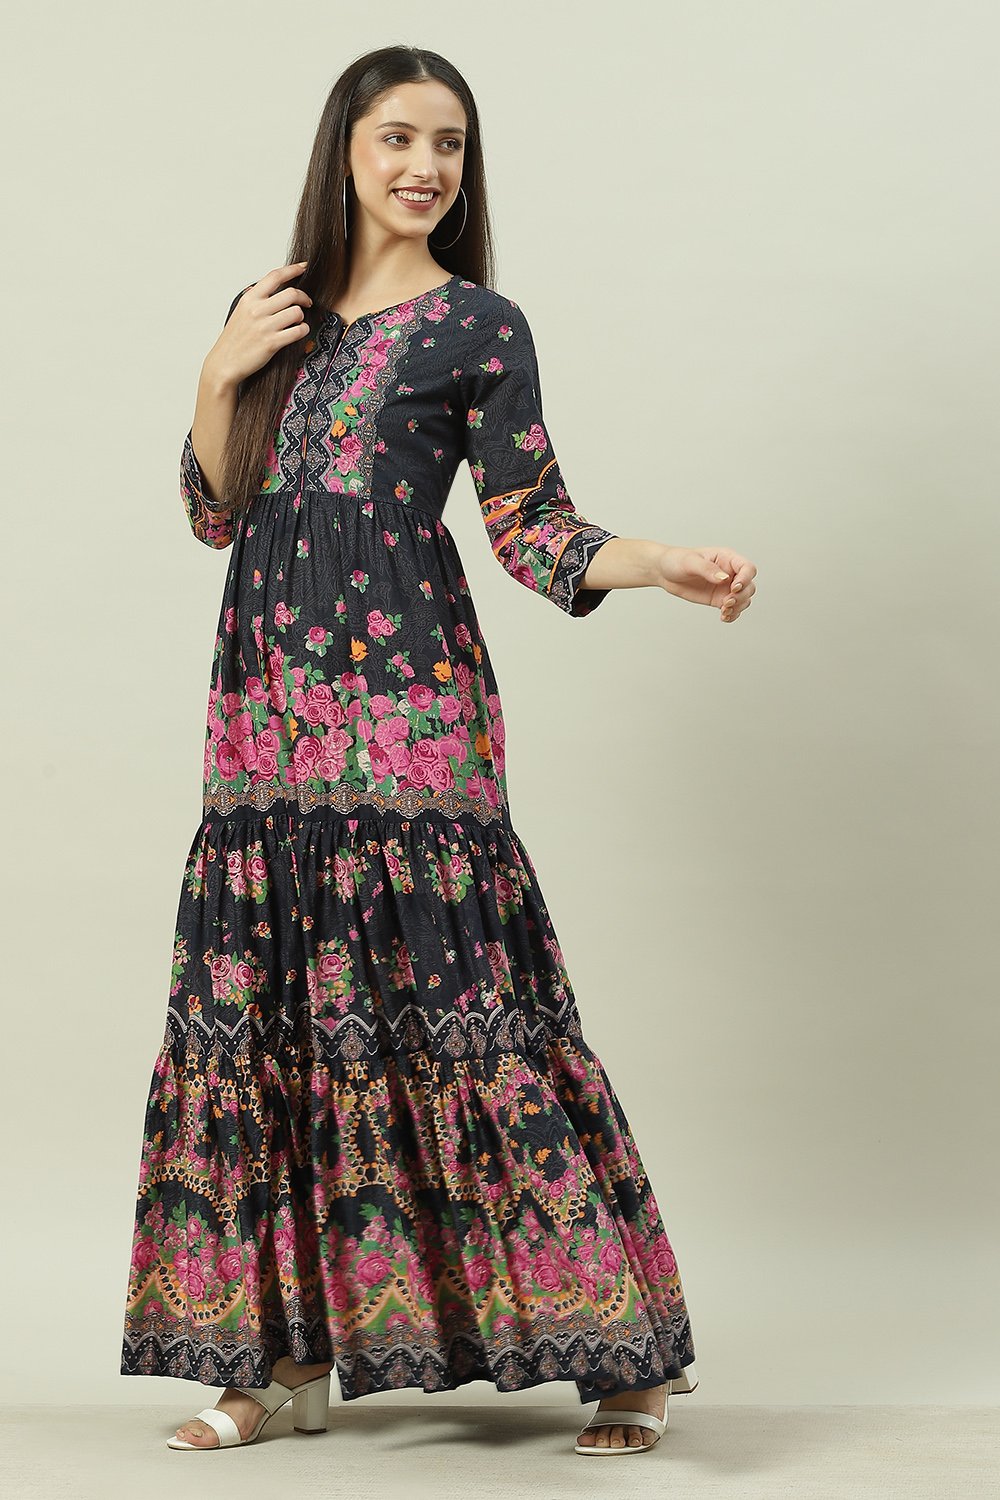 Buy Black Cotton Flared Fusion Printed Dress for INR1799.50 |Biba India